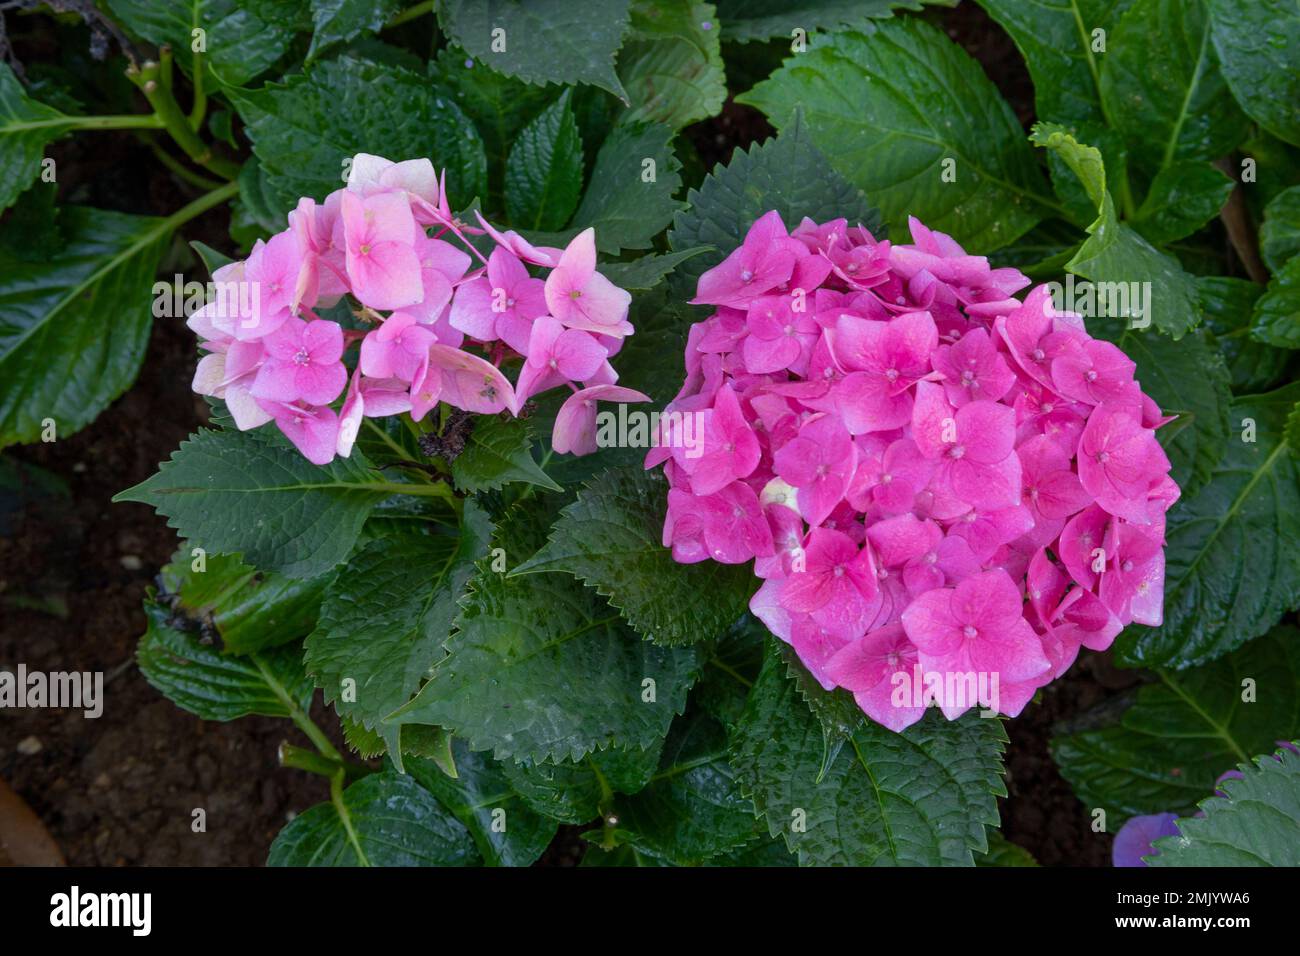 Pink hydrangea close up, French hydrangea, lacecap, penny mac flowers Stock Photo